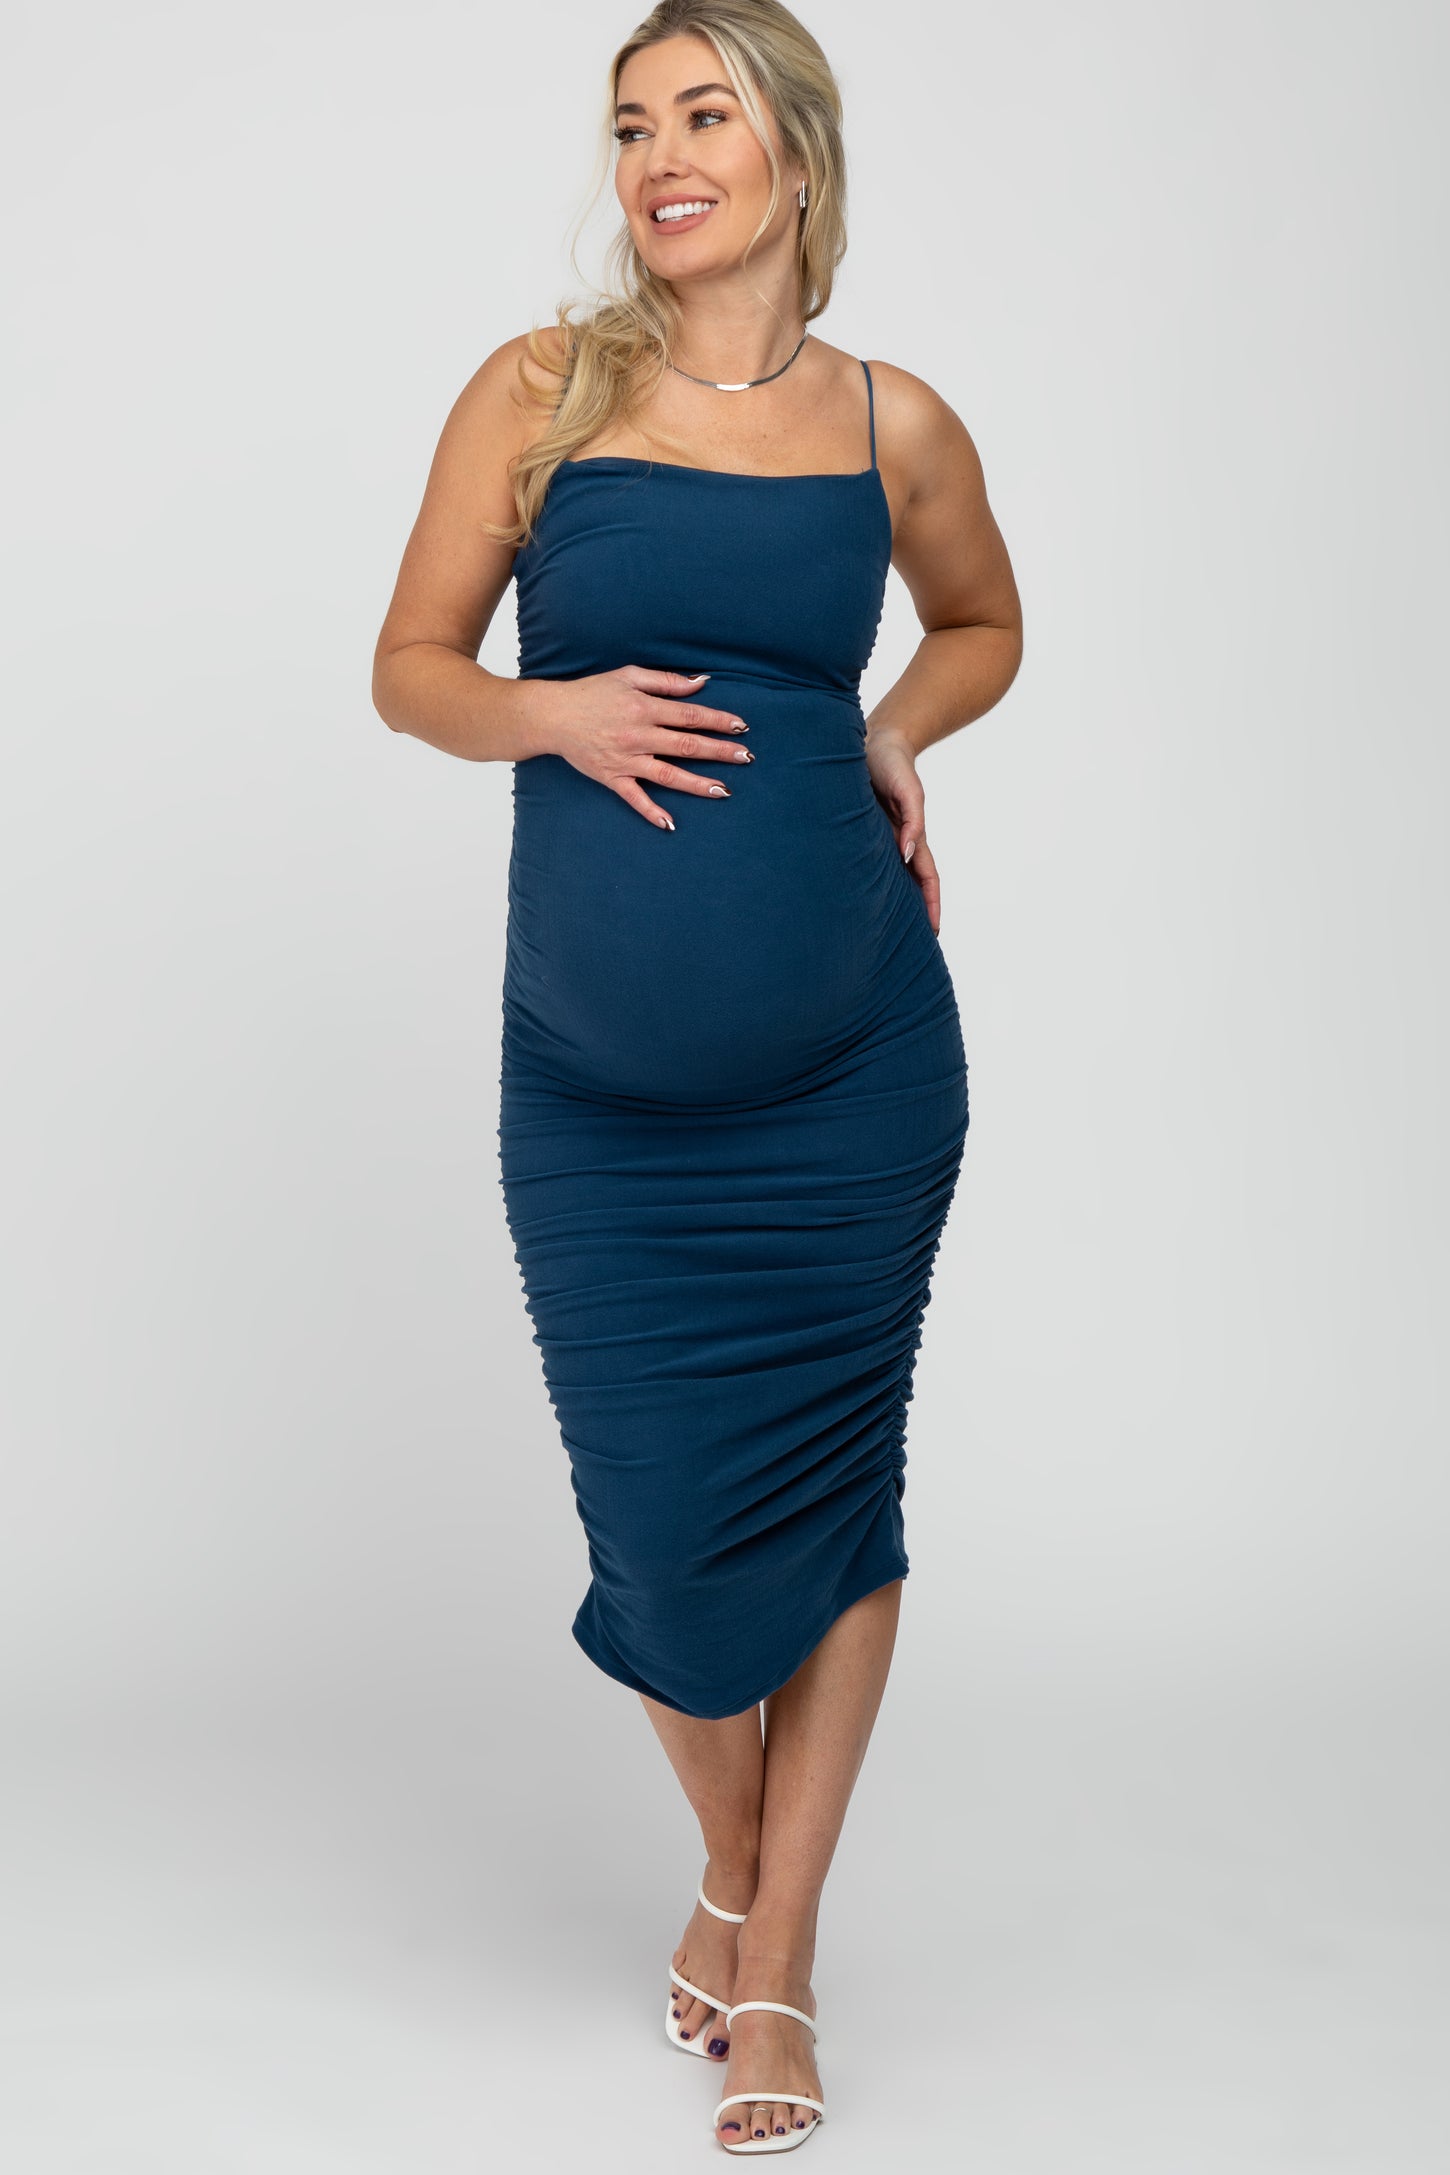 Dark Teal Ruched Fitted Maternity Dress